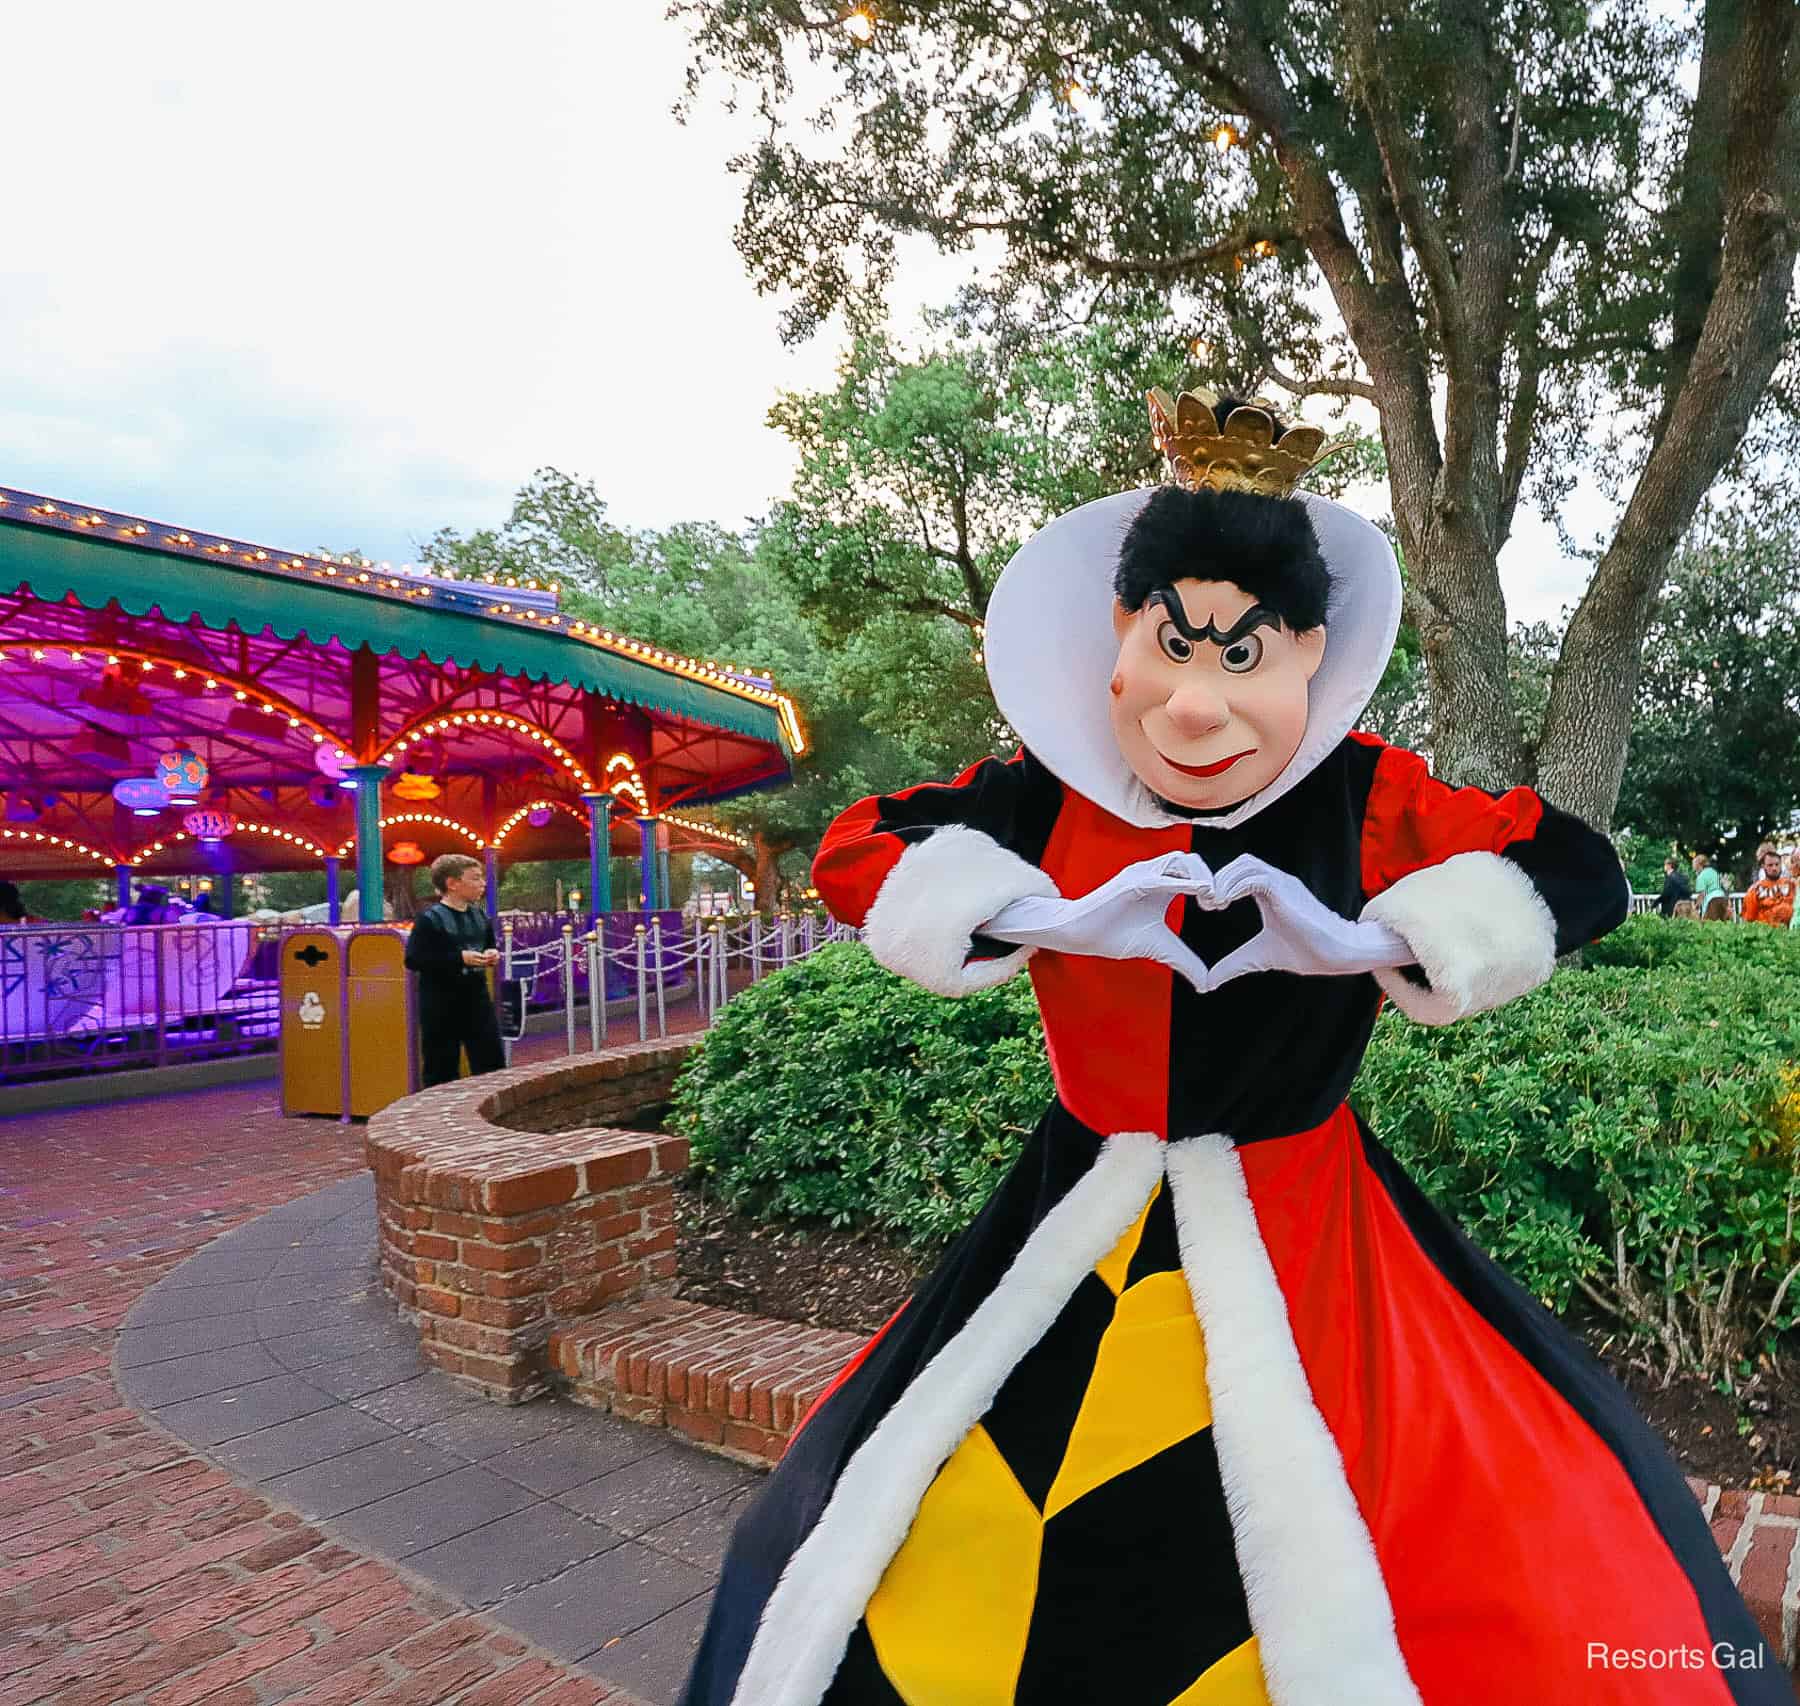 The Queen of Hearts poses for a photo making a heart shape with her hands at Mickey's Not So Scary Halloween Party. 